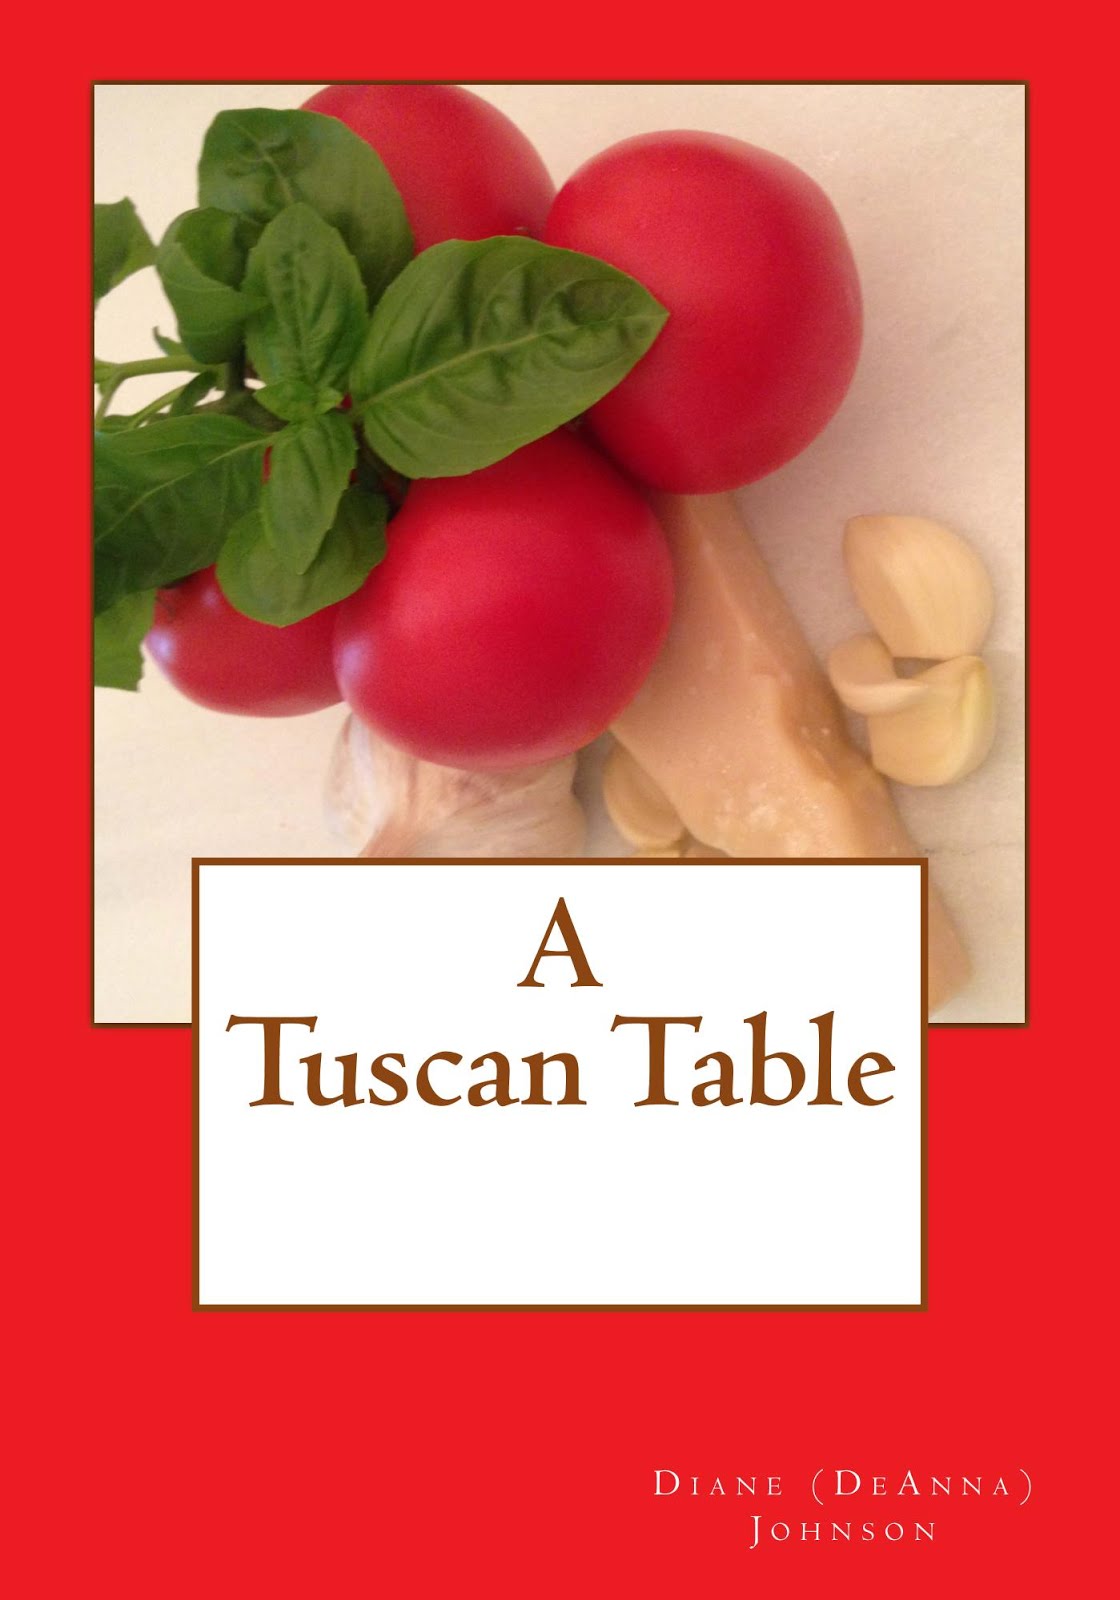 A TUSCAN TABLE